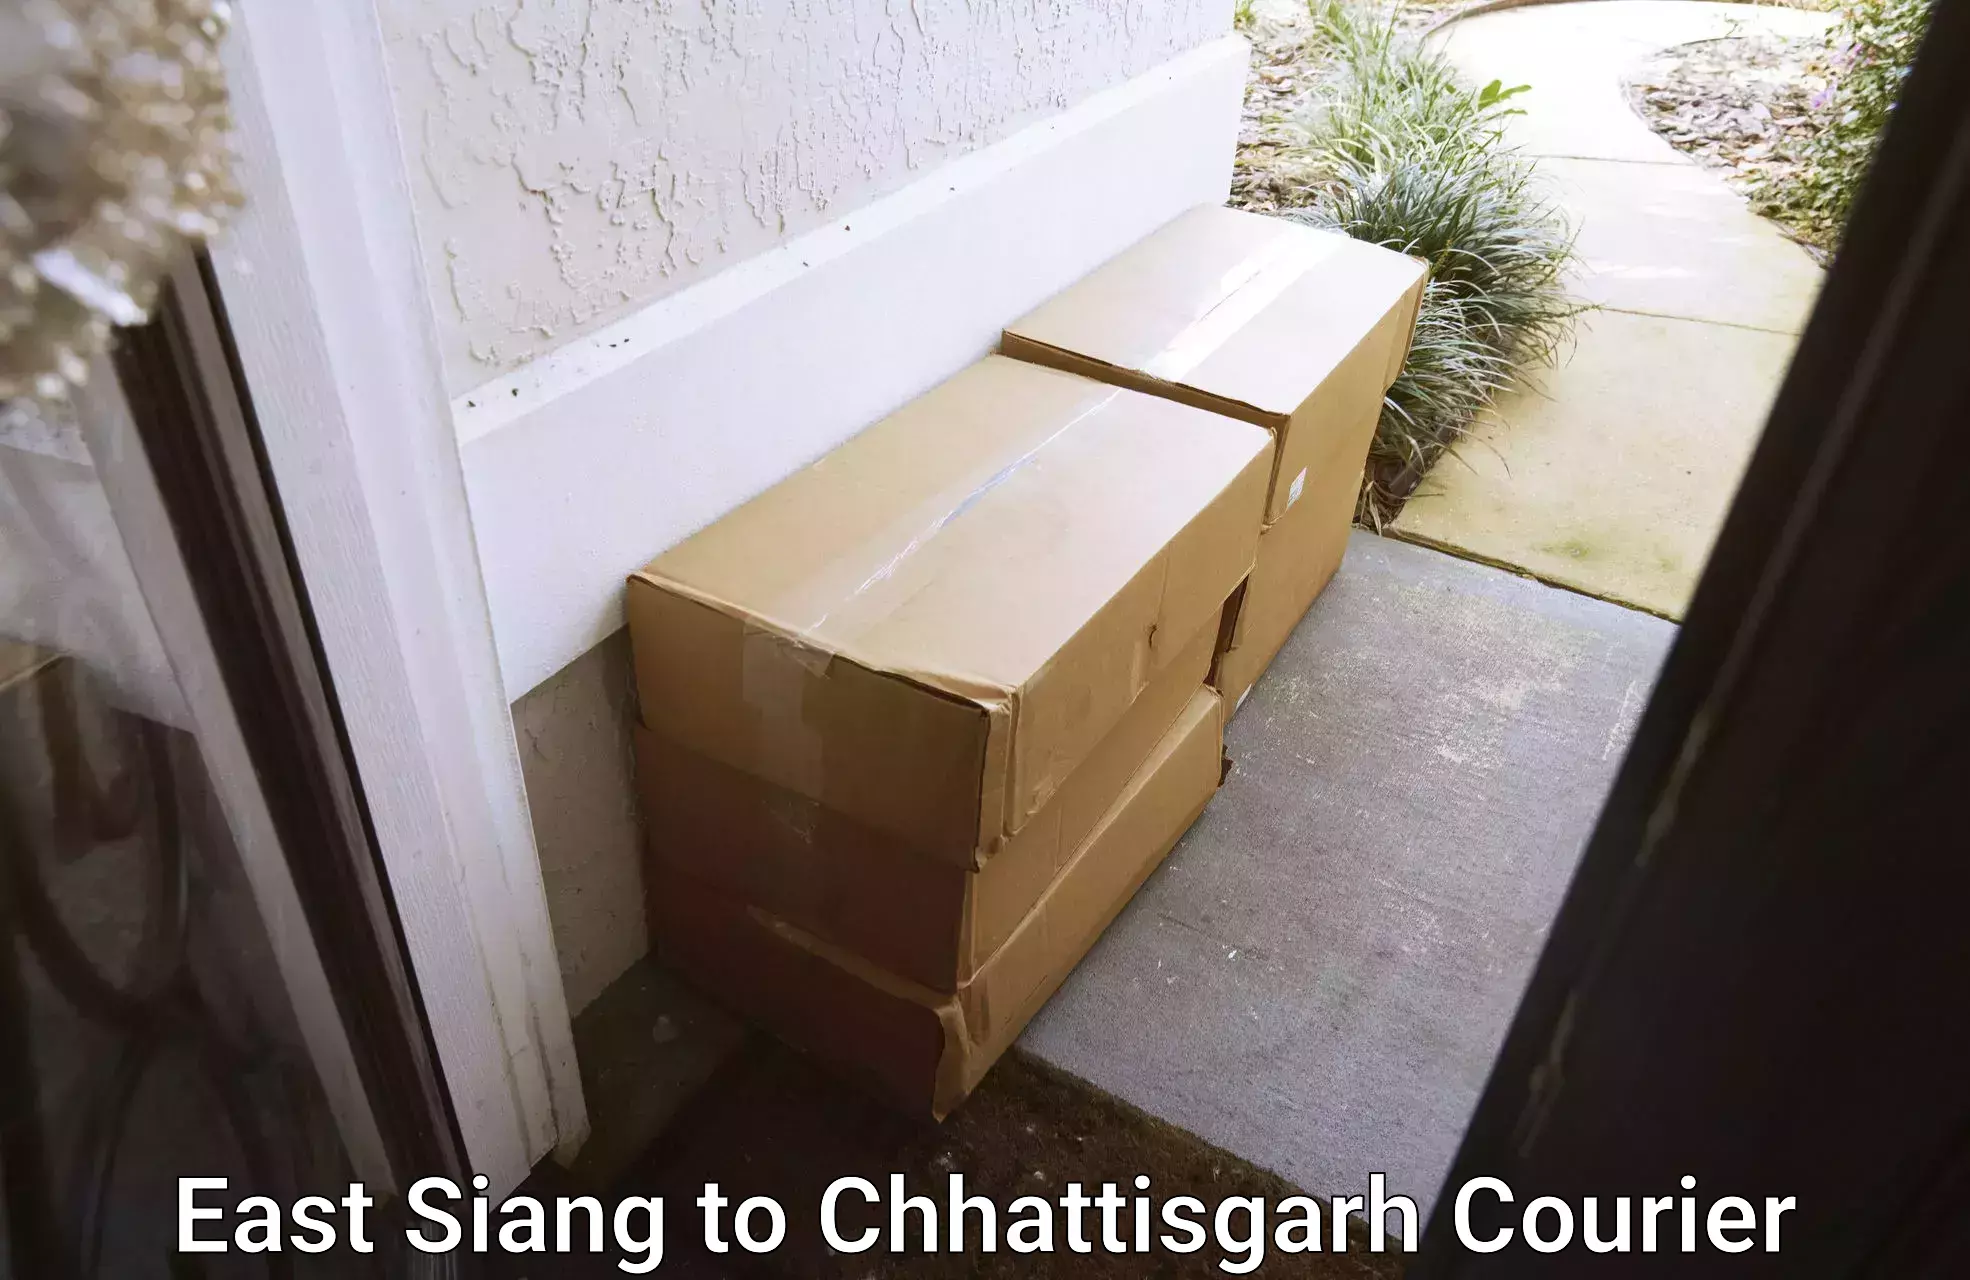 Expedited shipping solutions East Siang to Patna Chhattisgarh